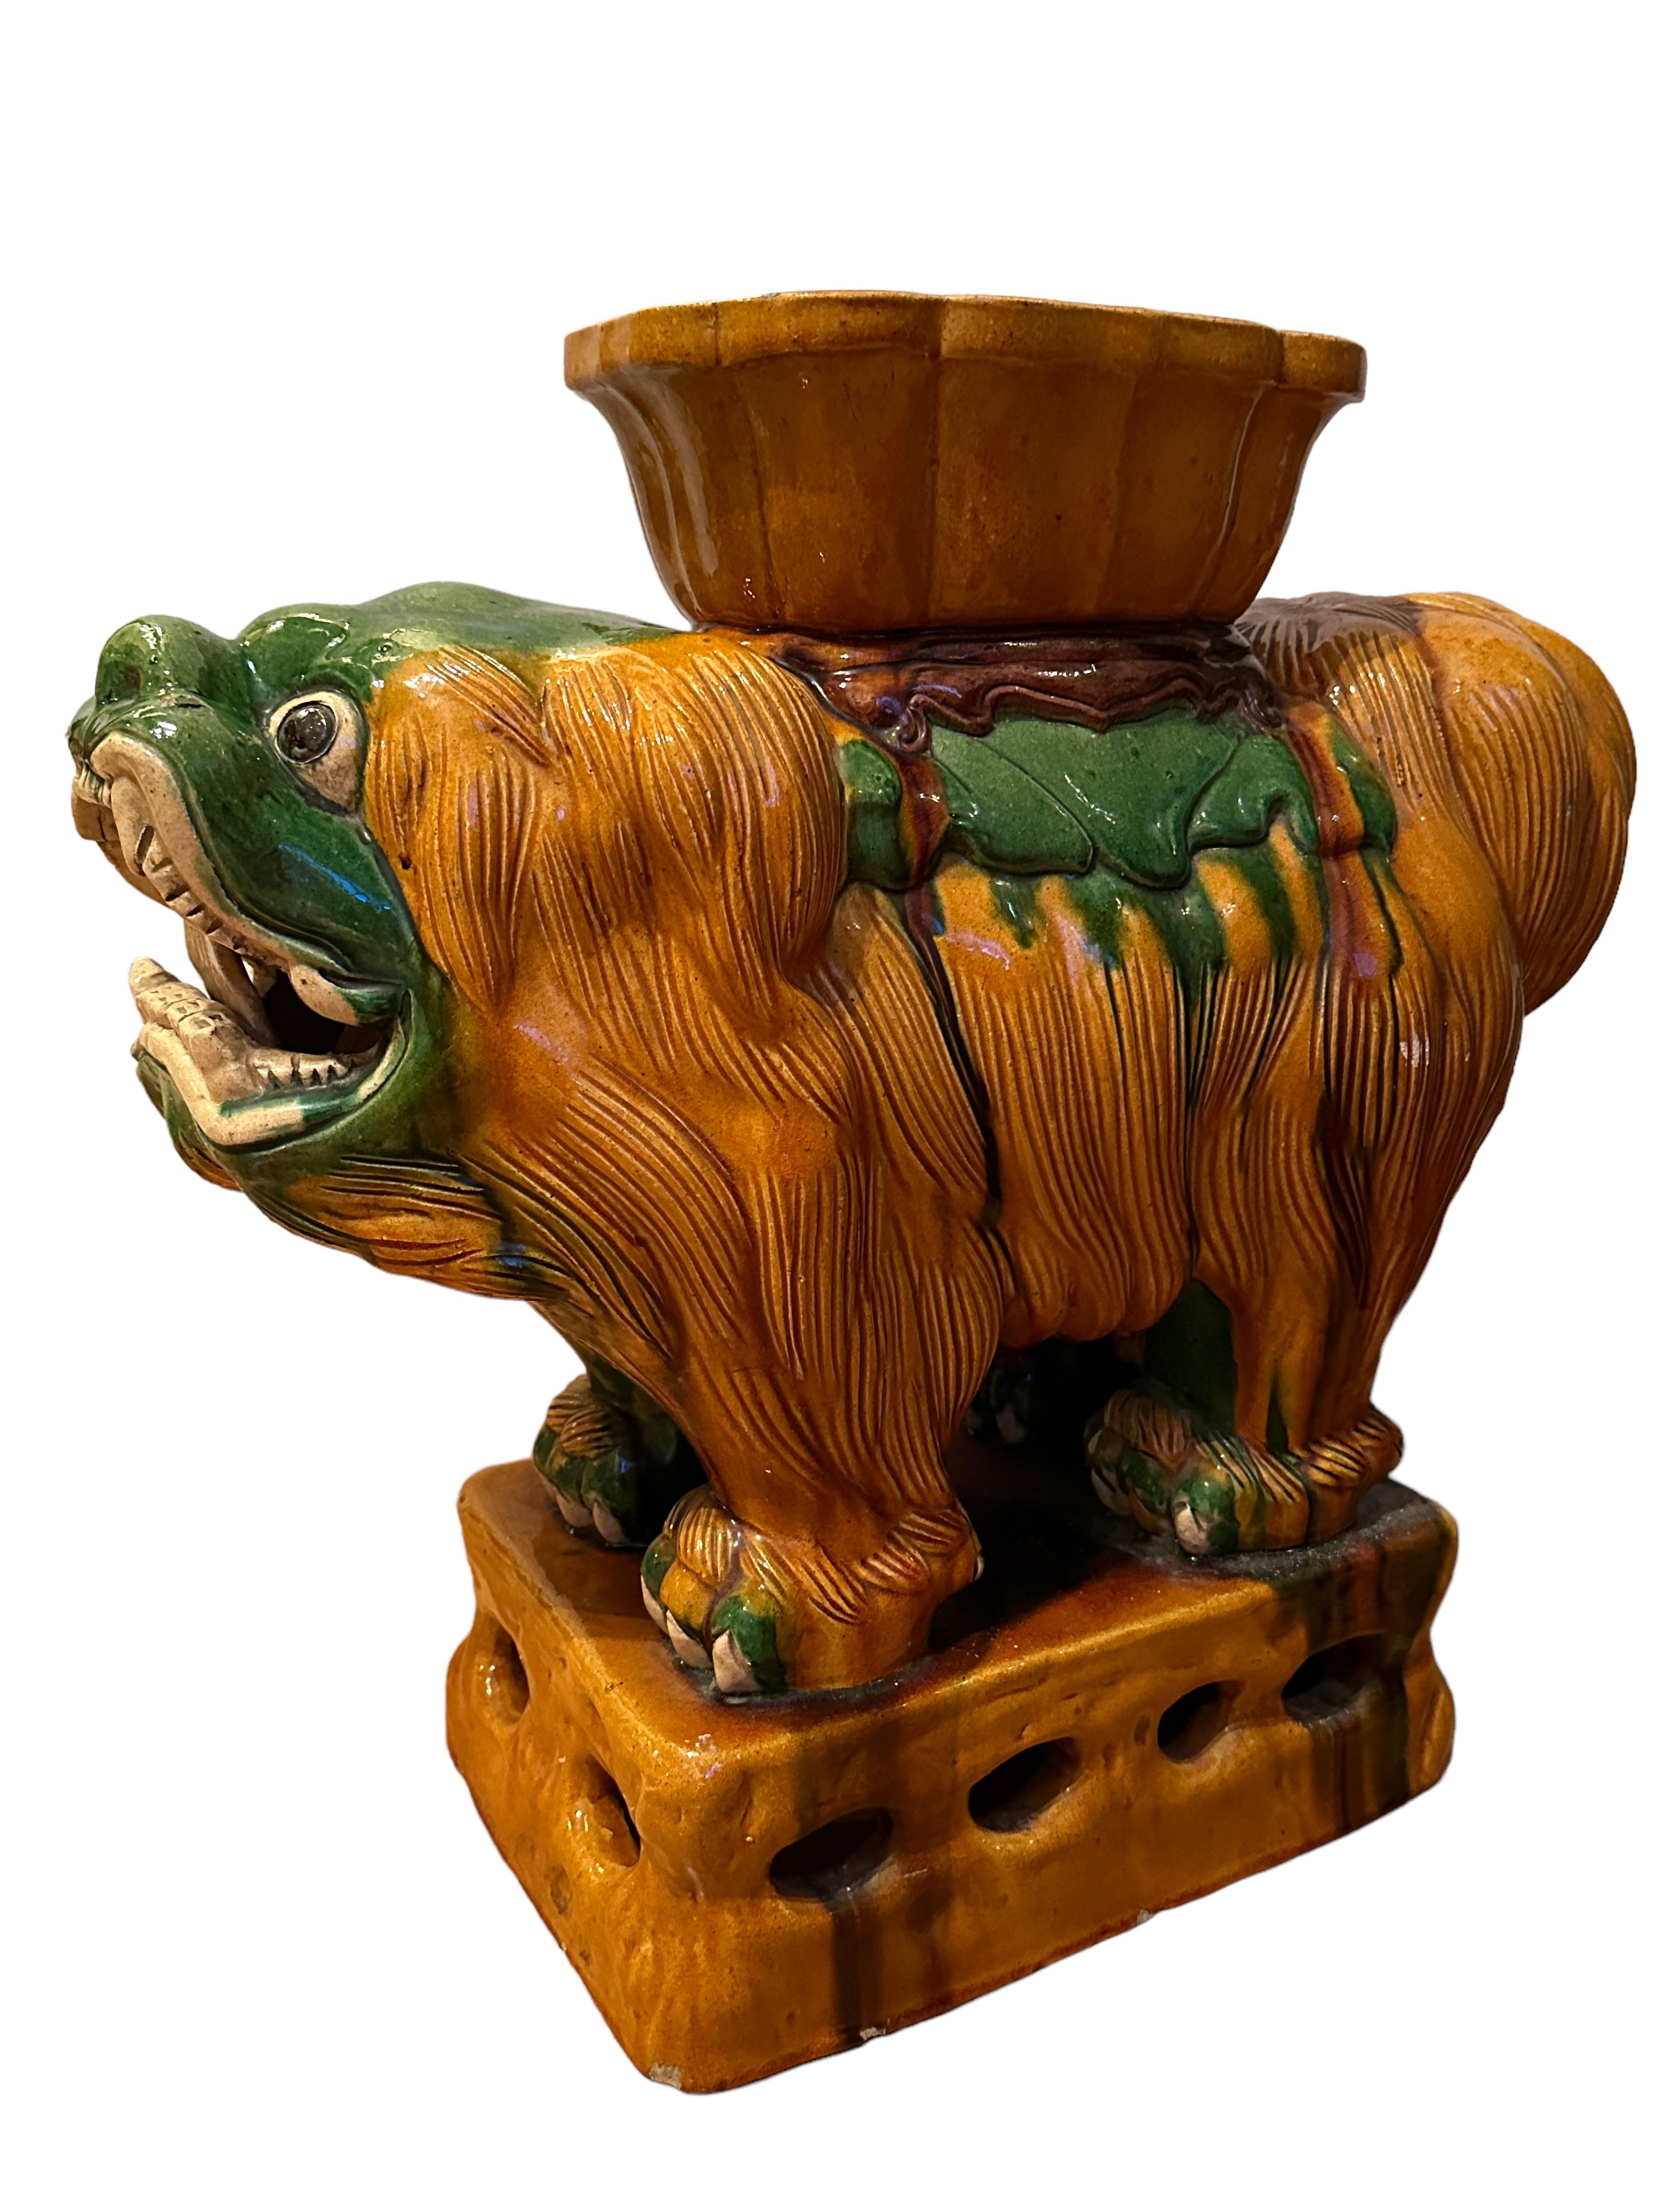 An outstanding pair of two Foo Dog statues in glazed and hand painted terracotta. Perfectly placed on a pedestal, lifelike and life-size representations of this majestic being, stern, watchful and obedient at the same time.
Elegant and of